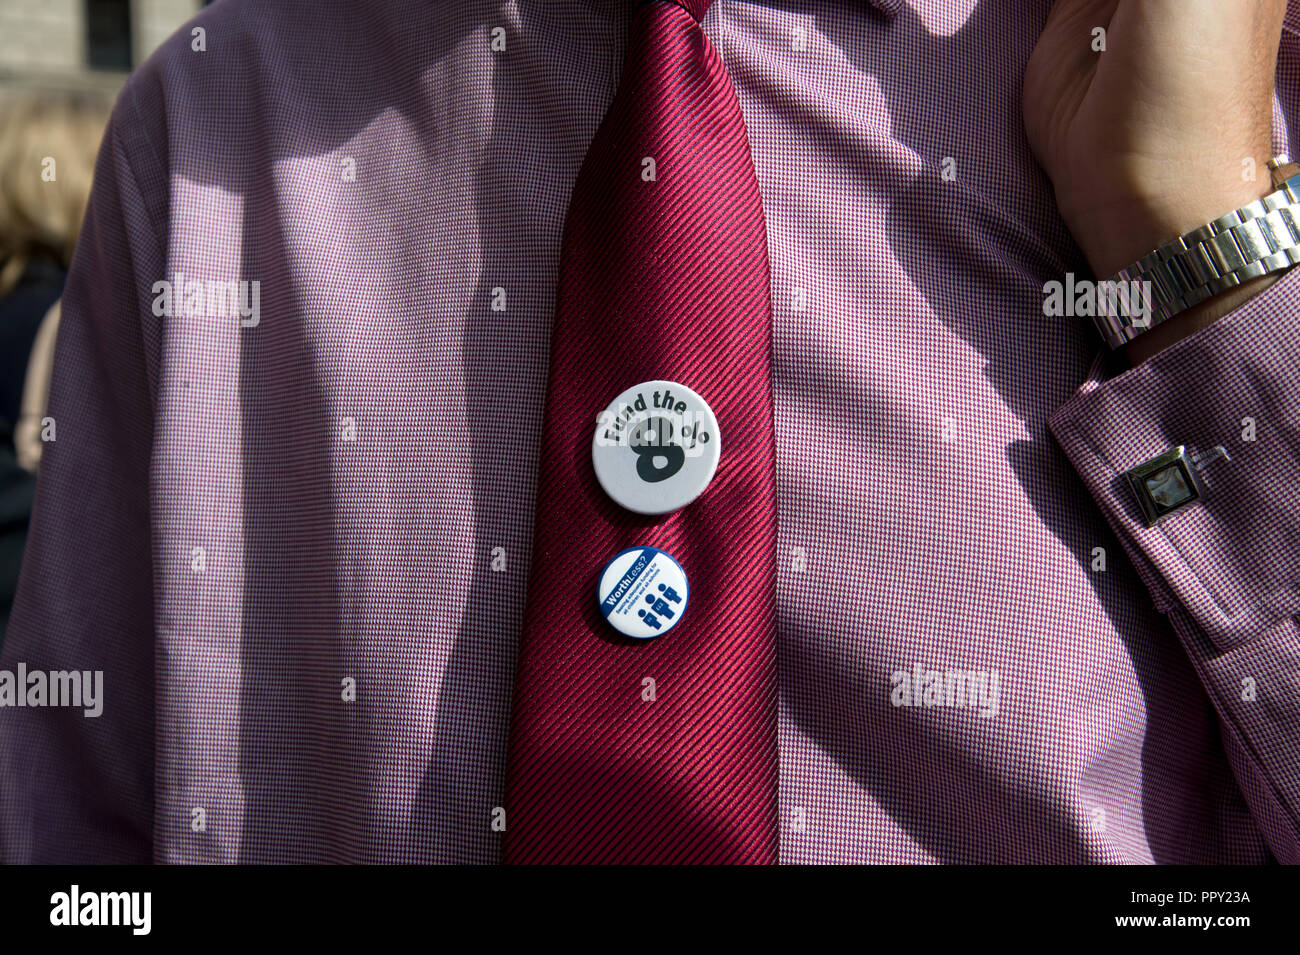 Westminster. London, UK. September 28th 2018. Headteachers from all over the country demonstrated in Parliament Square over cuts to state school funding and walked to Downing Street where they handed in a letter to the Chancellor of the Exchequer, Philip Hammond. The badge refers to the 8% cut. Credit: Jenny Matthews/Alamy Live News Stock Photo